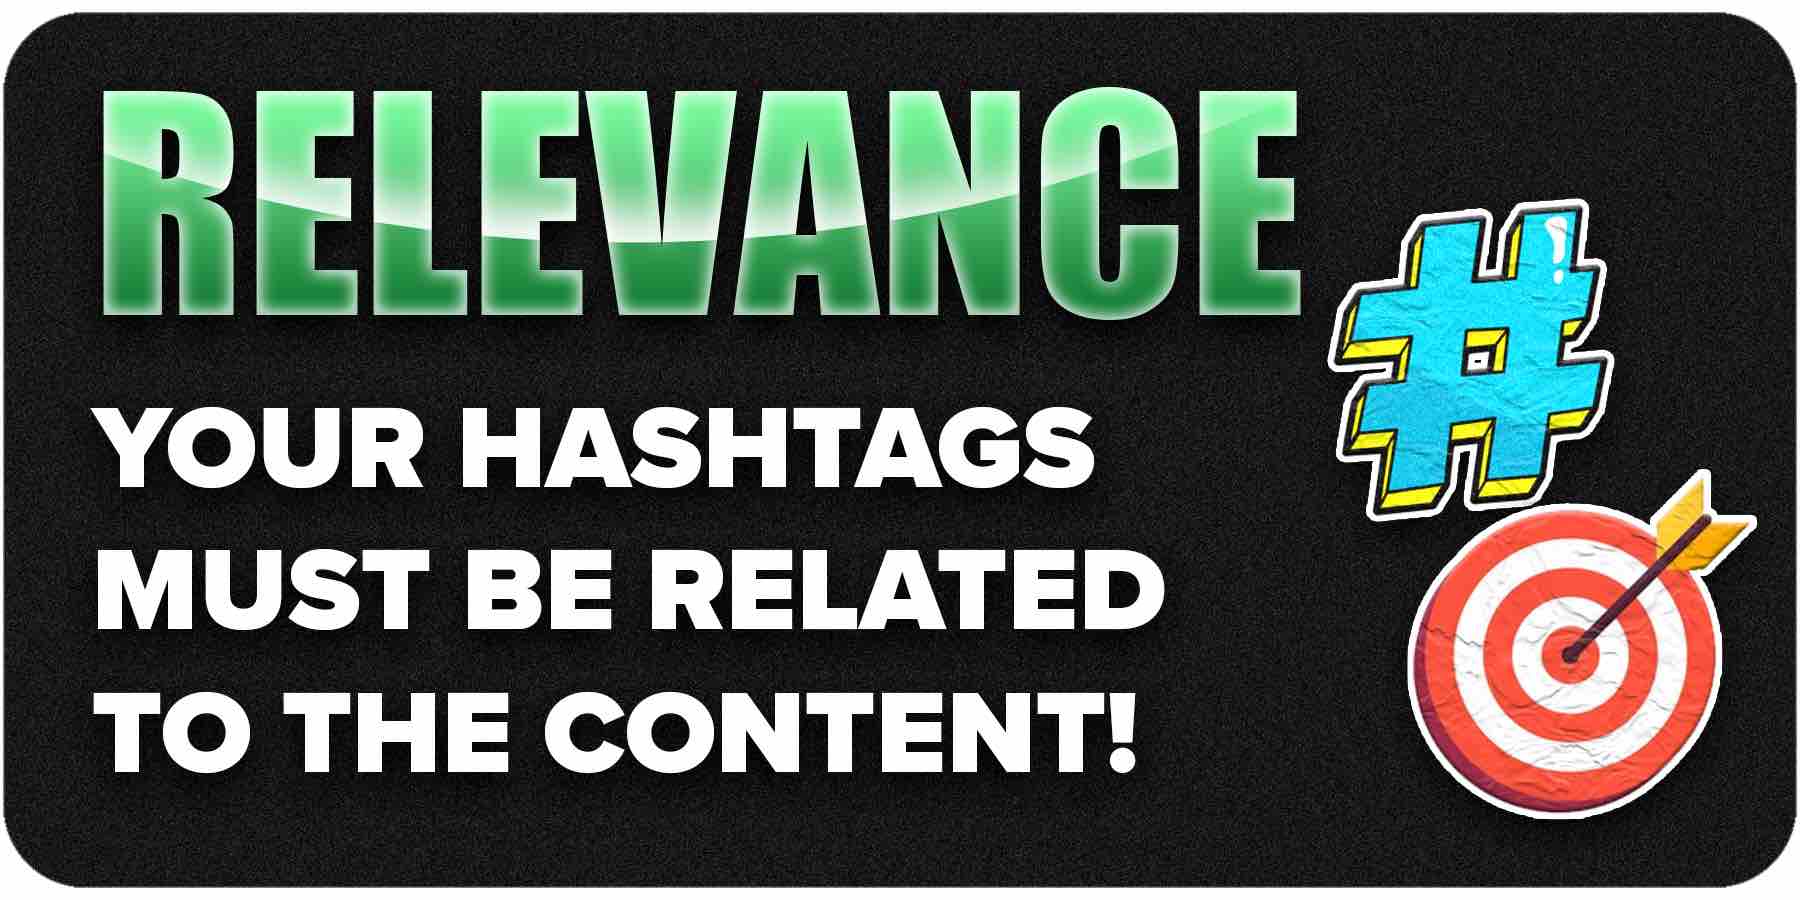 Keep the hashtag relevant to content